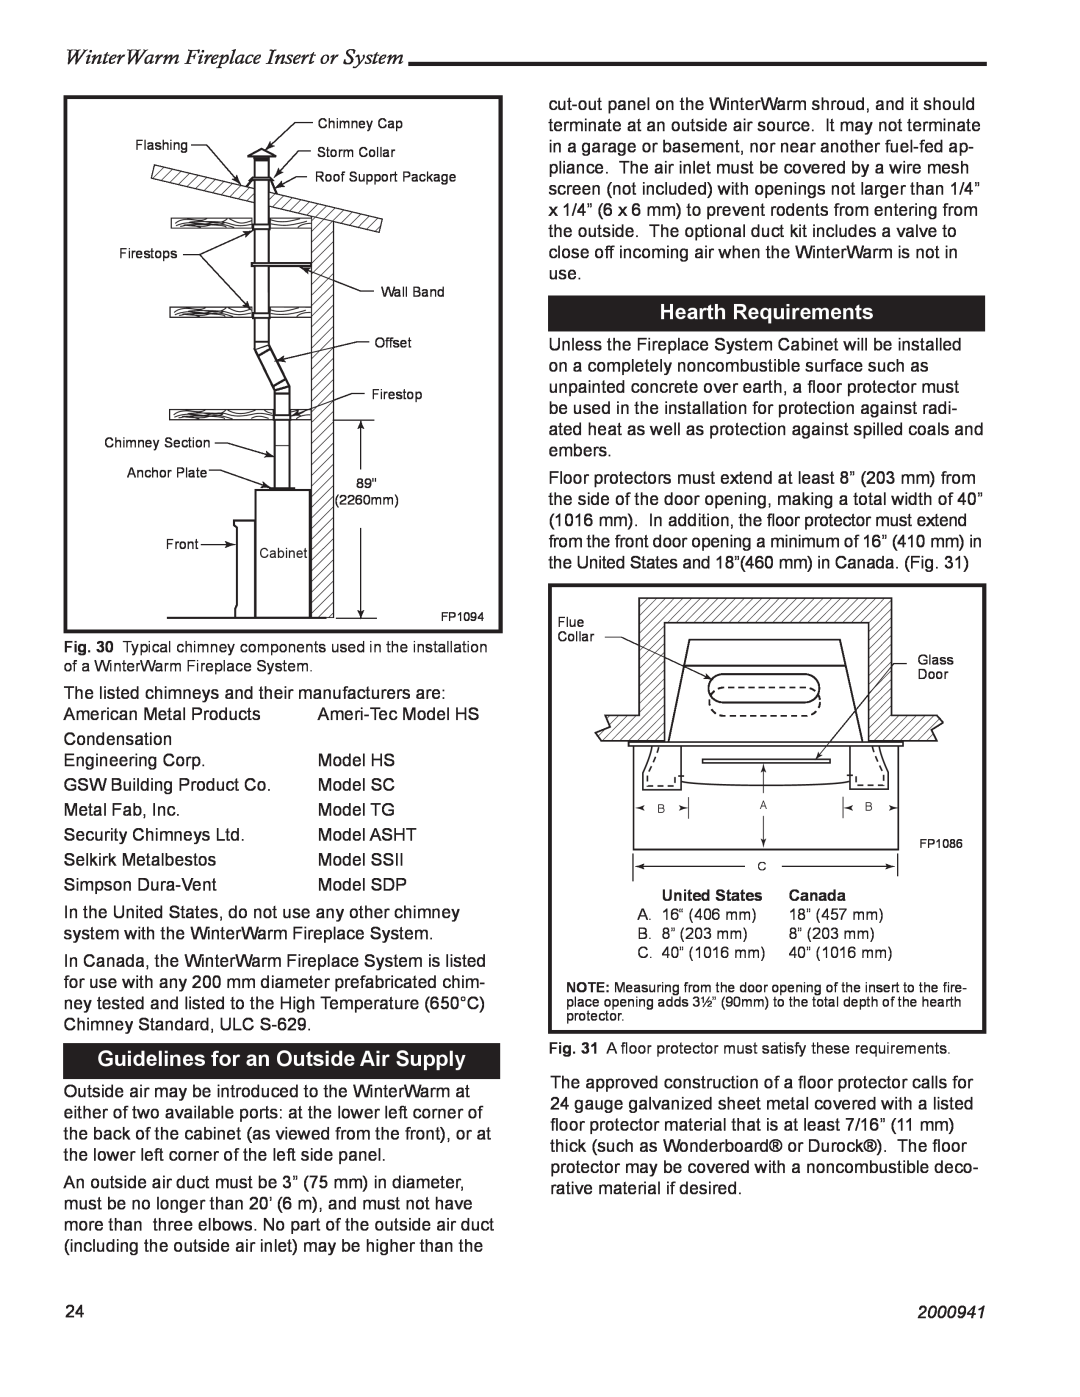 Vermont Casting WinterWarm Fireplace Insert or System Guidelines for an Outside Air Supply, Hearth Requirements, 2000941 